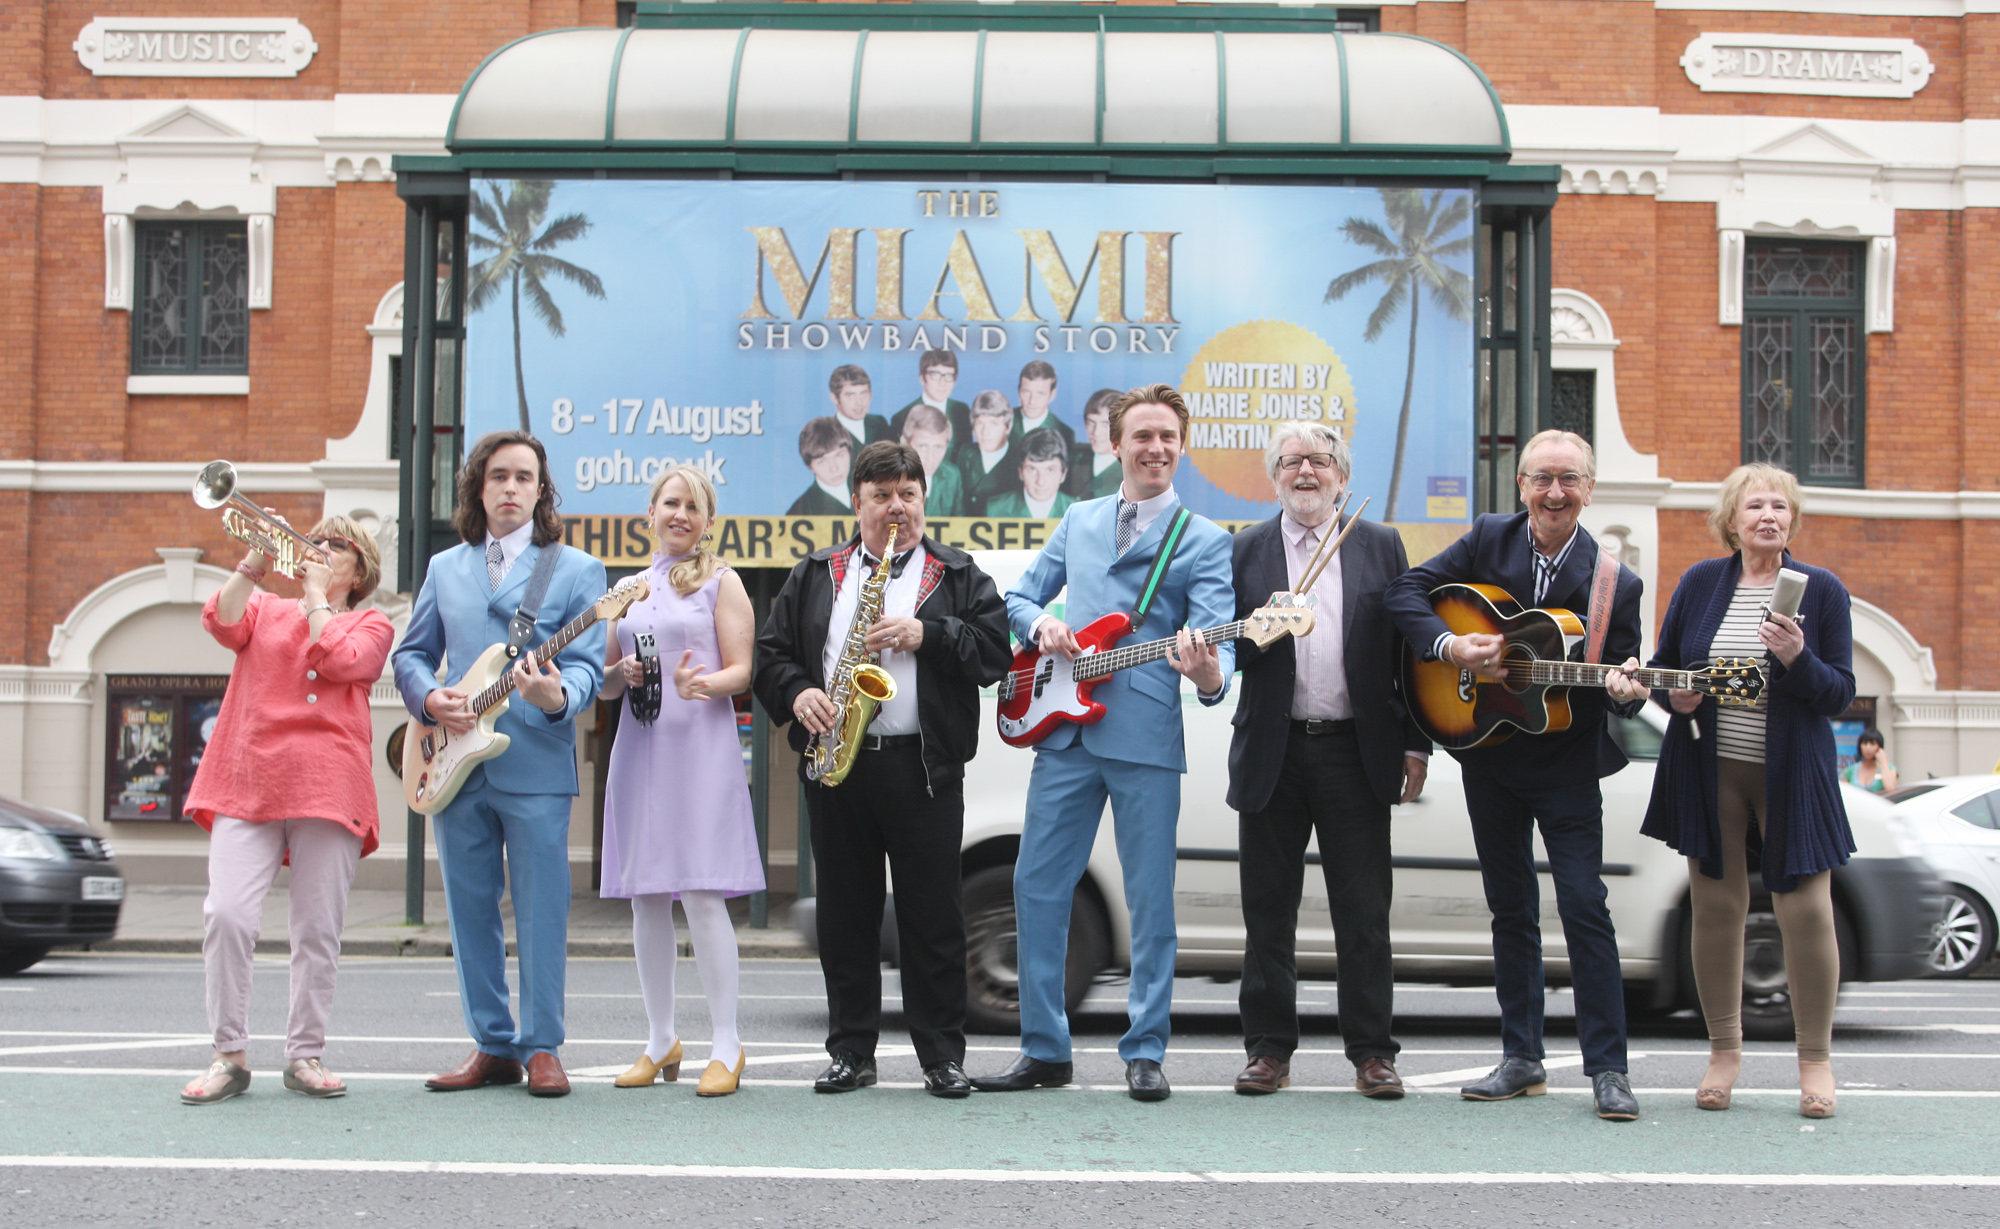 LET THE MUSIC PLAY: Showband fans are in for a treat as a new Grand Opera House musical tells the story of the legendary Miami\n